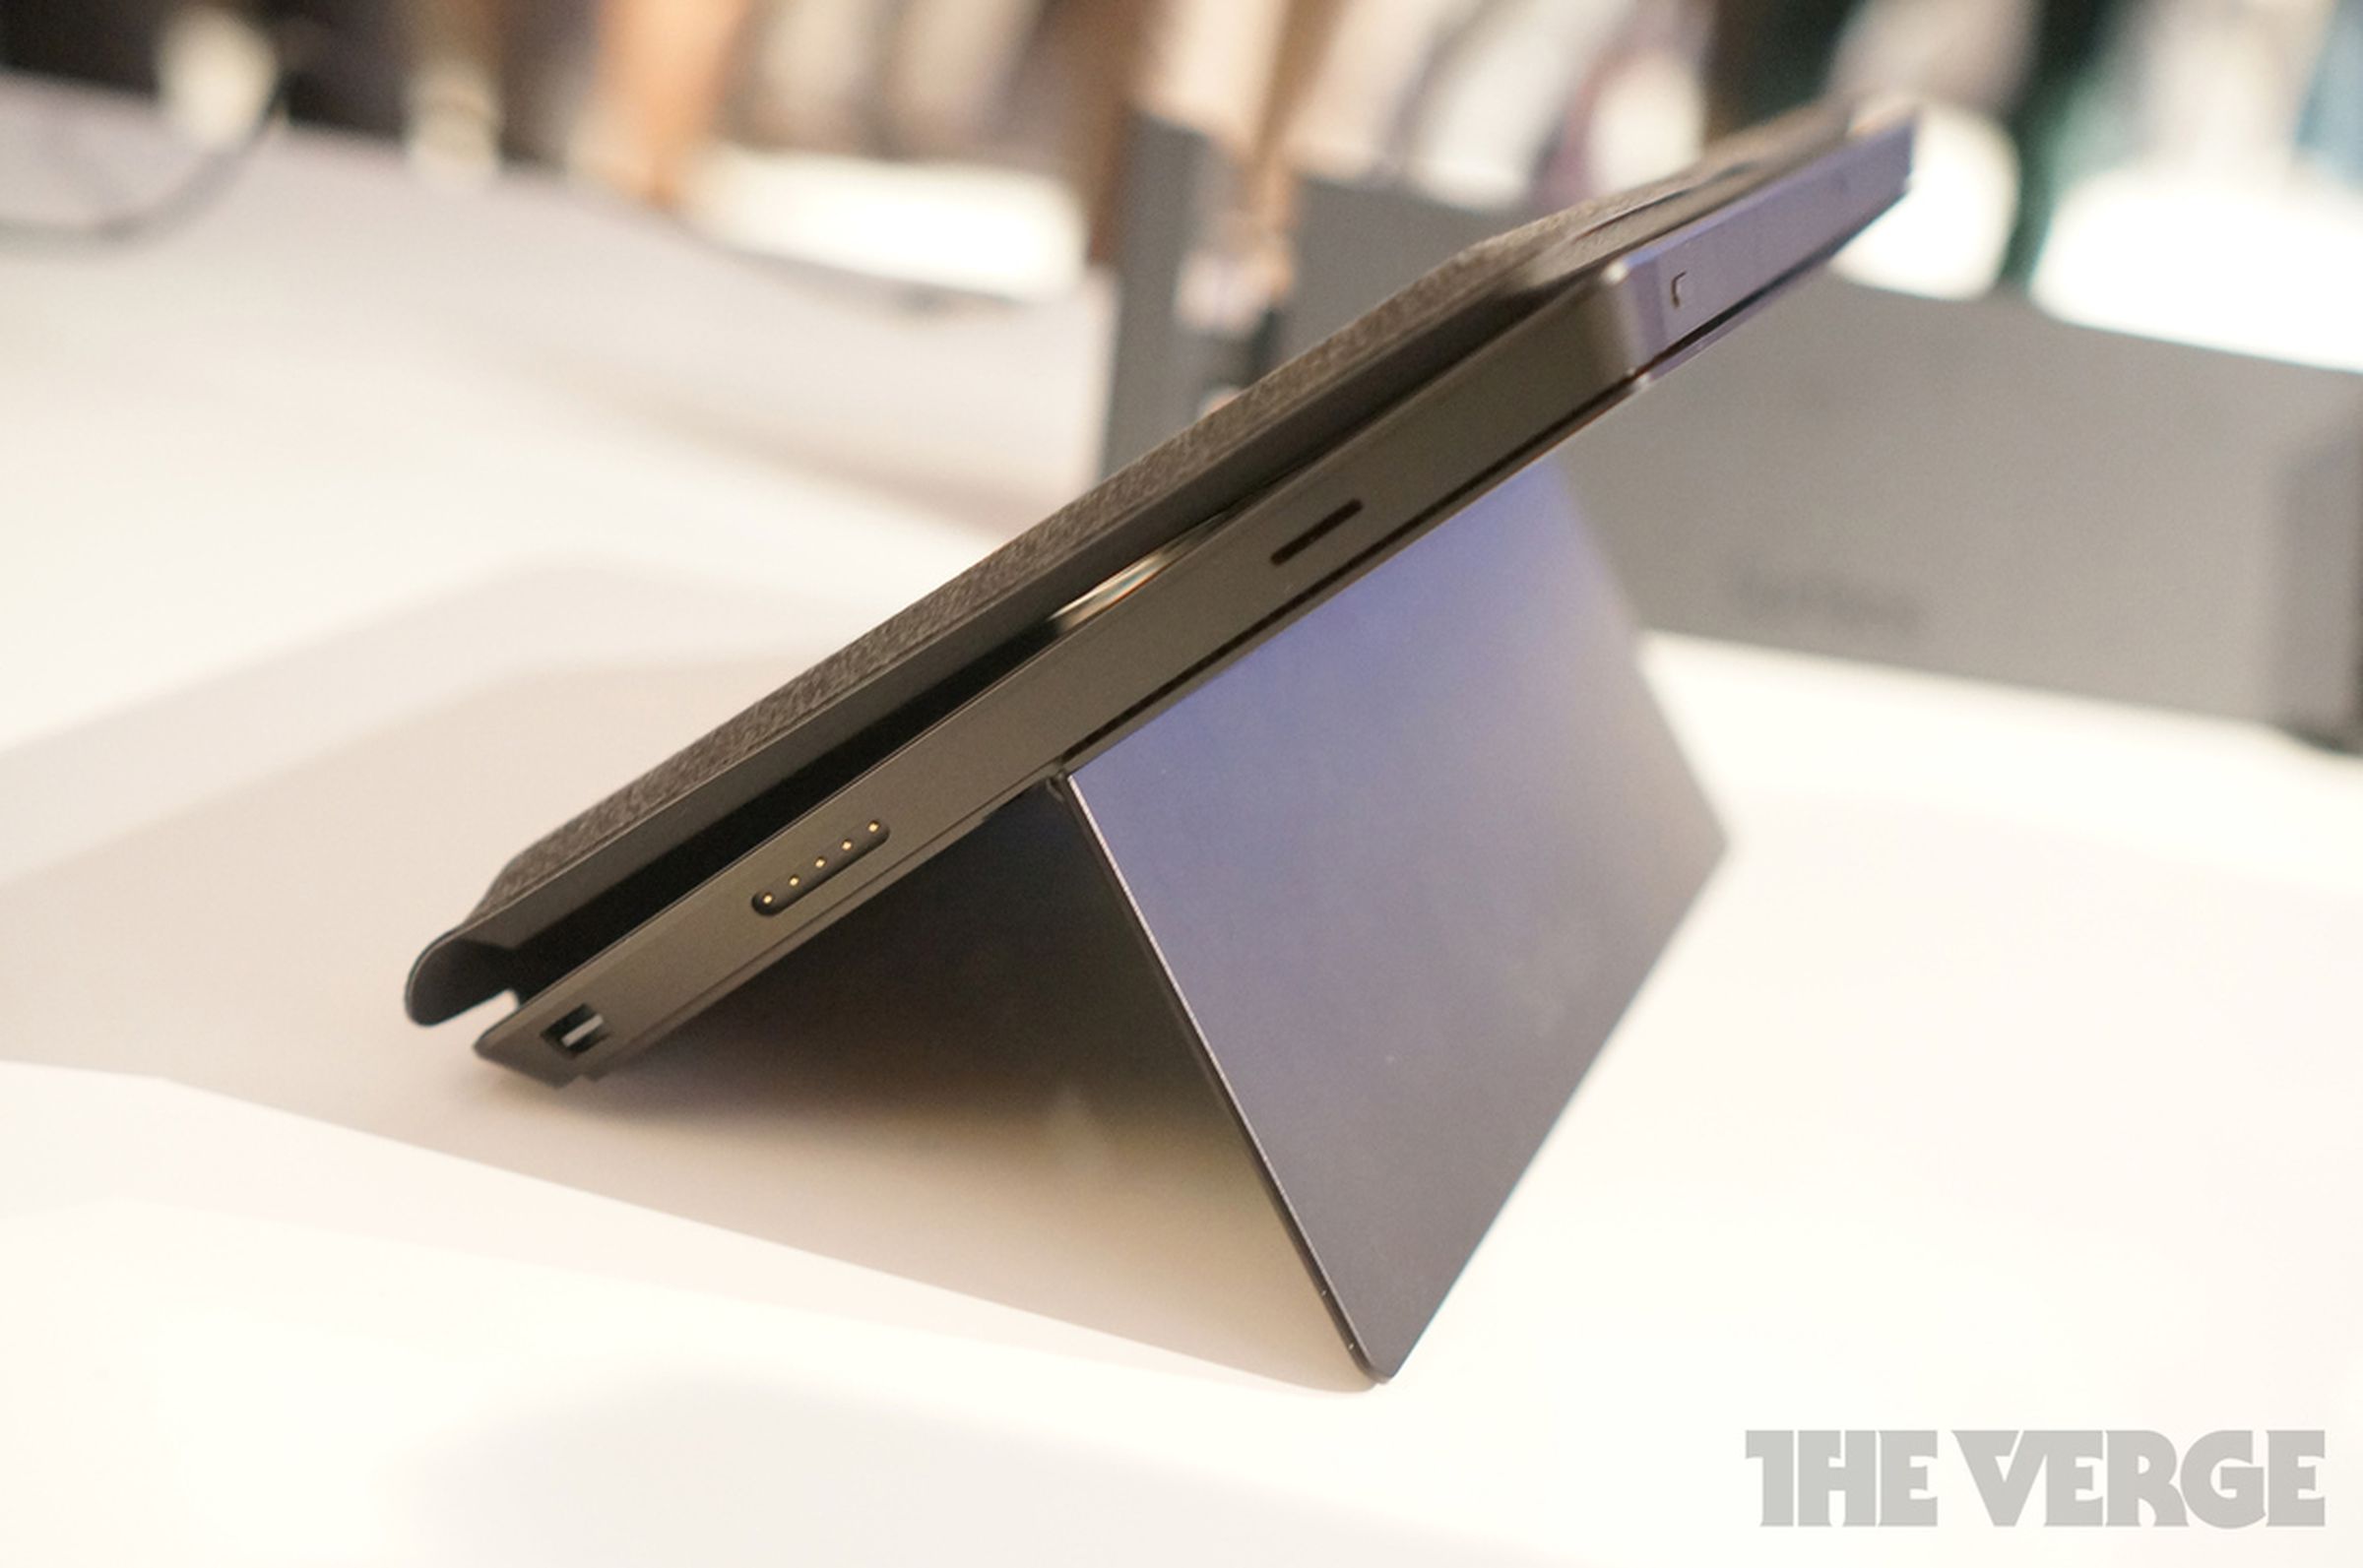 Surface Pro 2 hands on photos